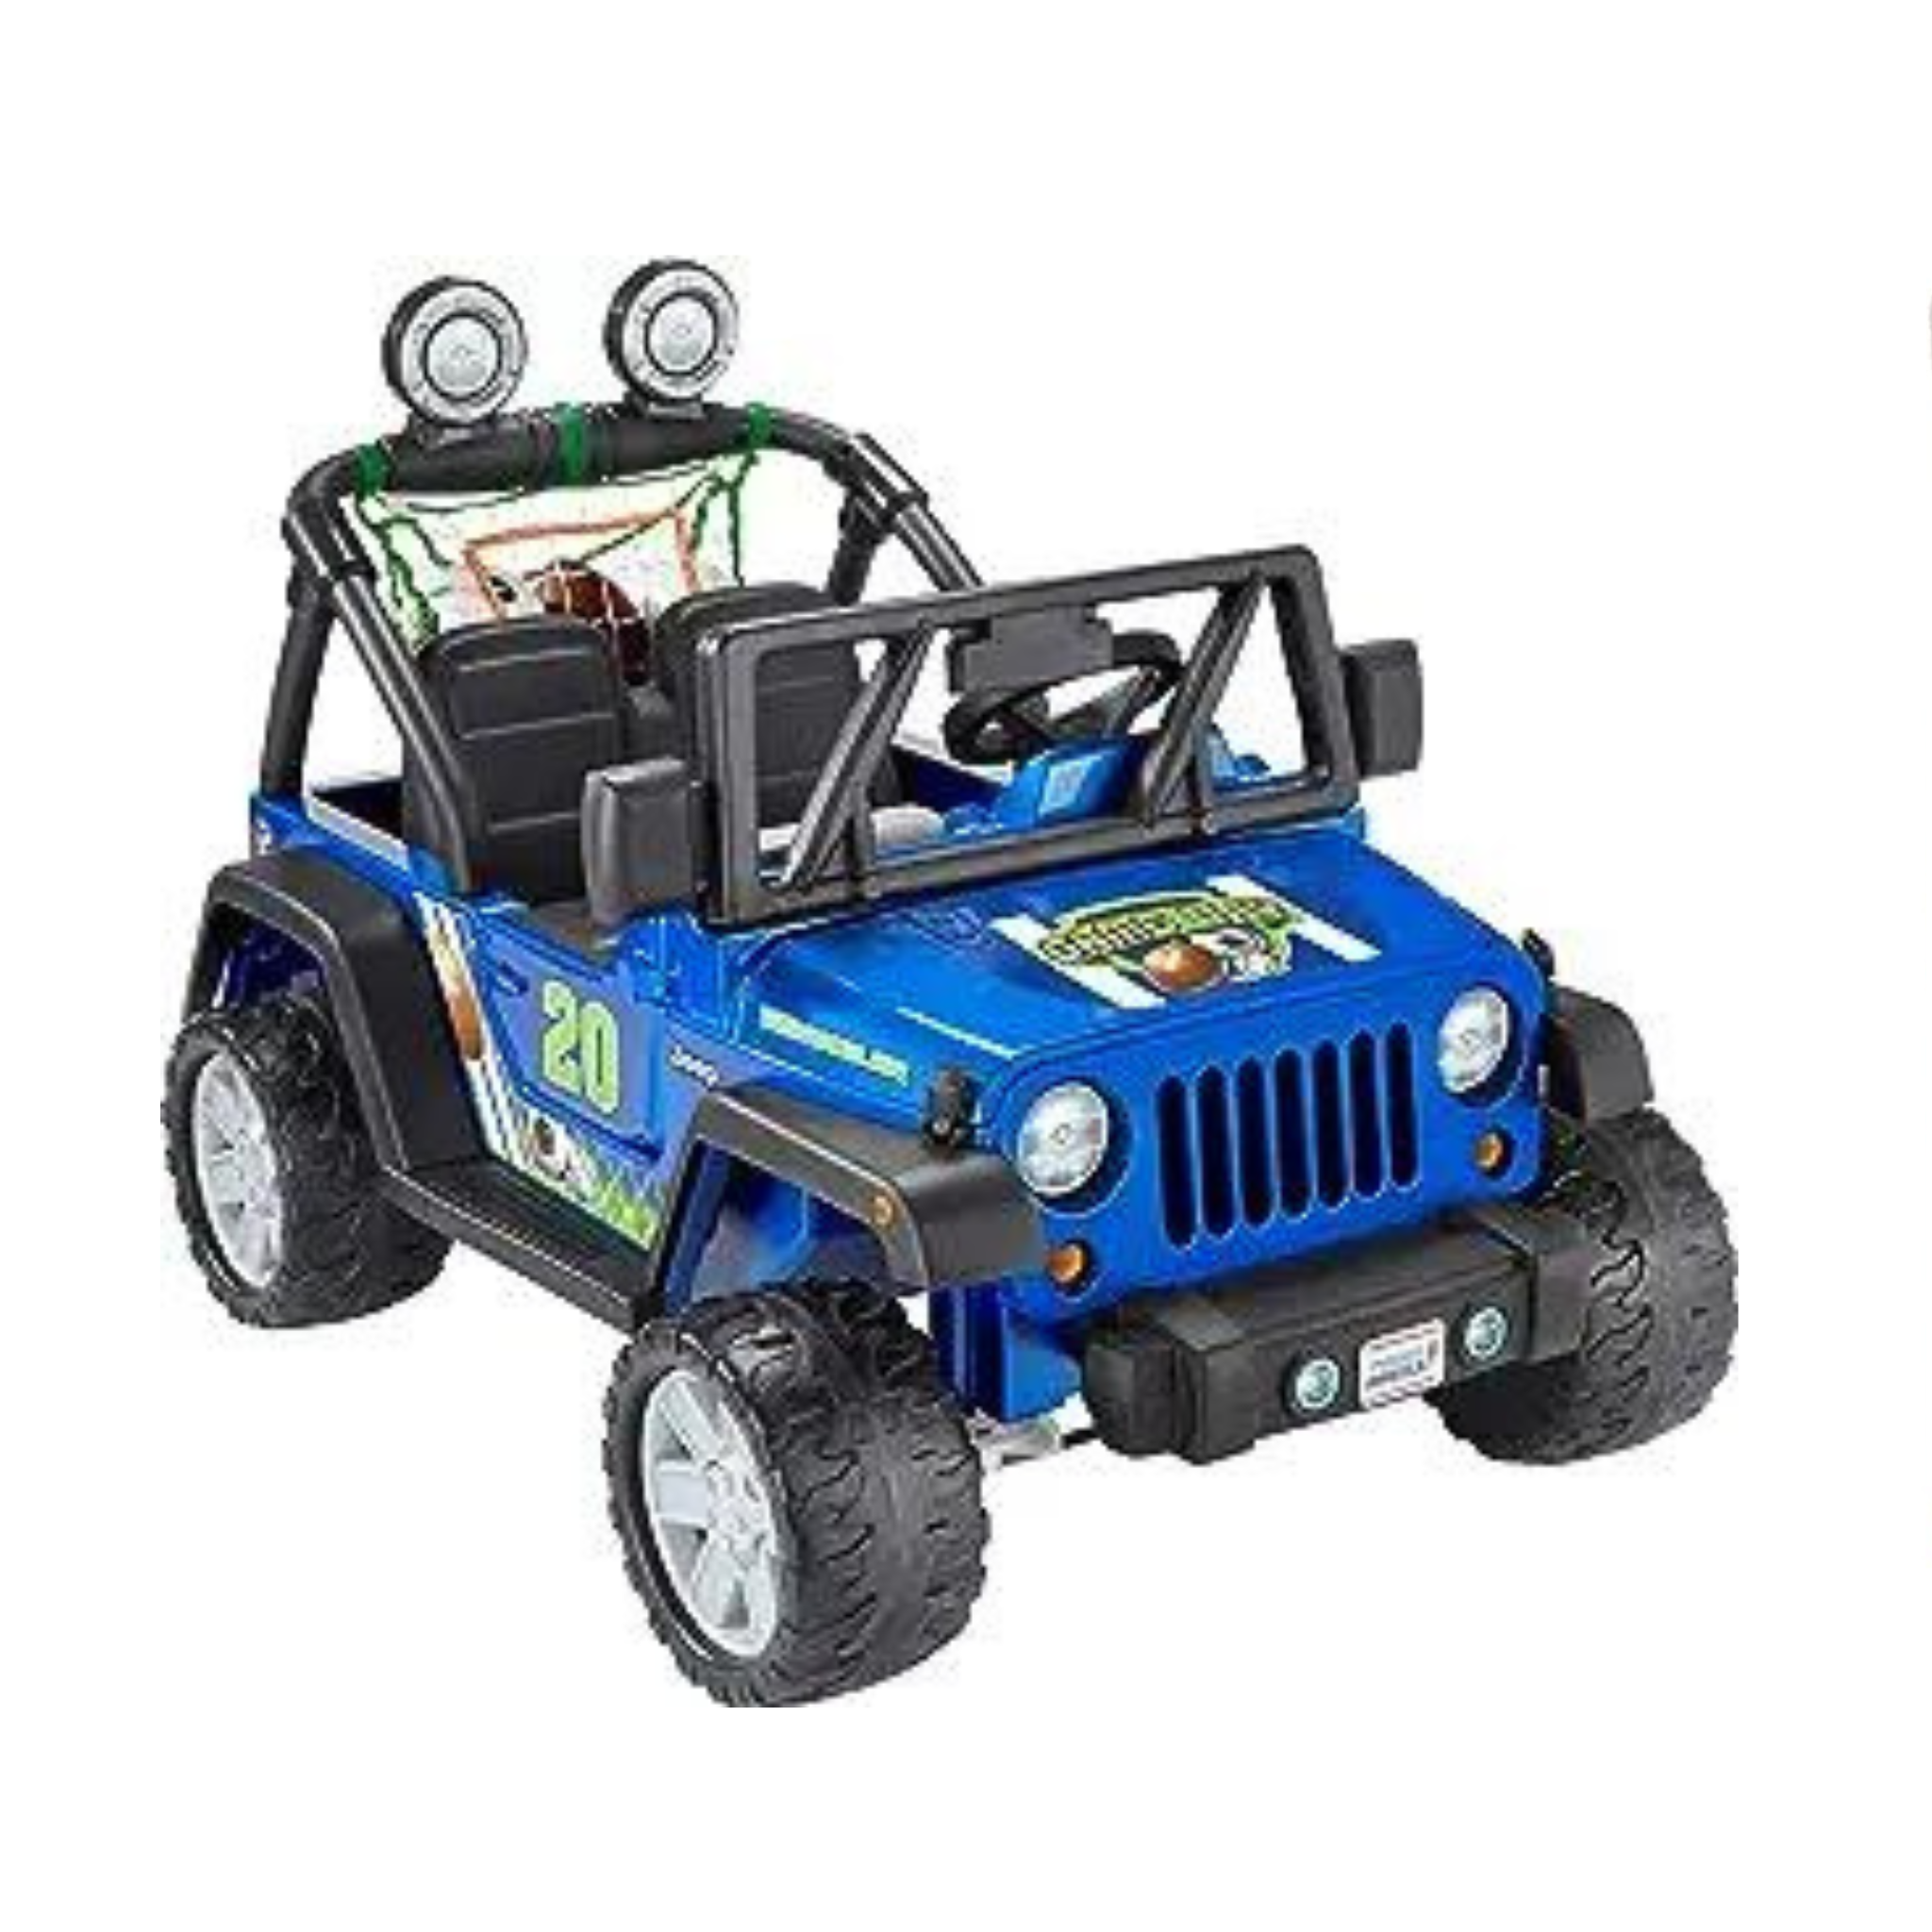 Power Wheels Ride-On Gameday Jeep Wrangler 12 Volt Battery-Powered Vehicle